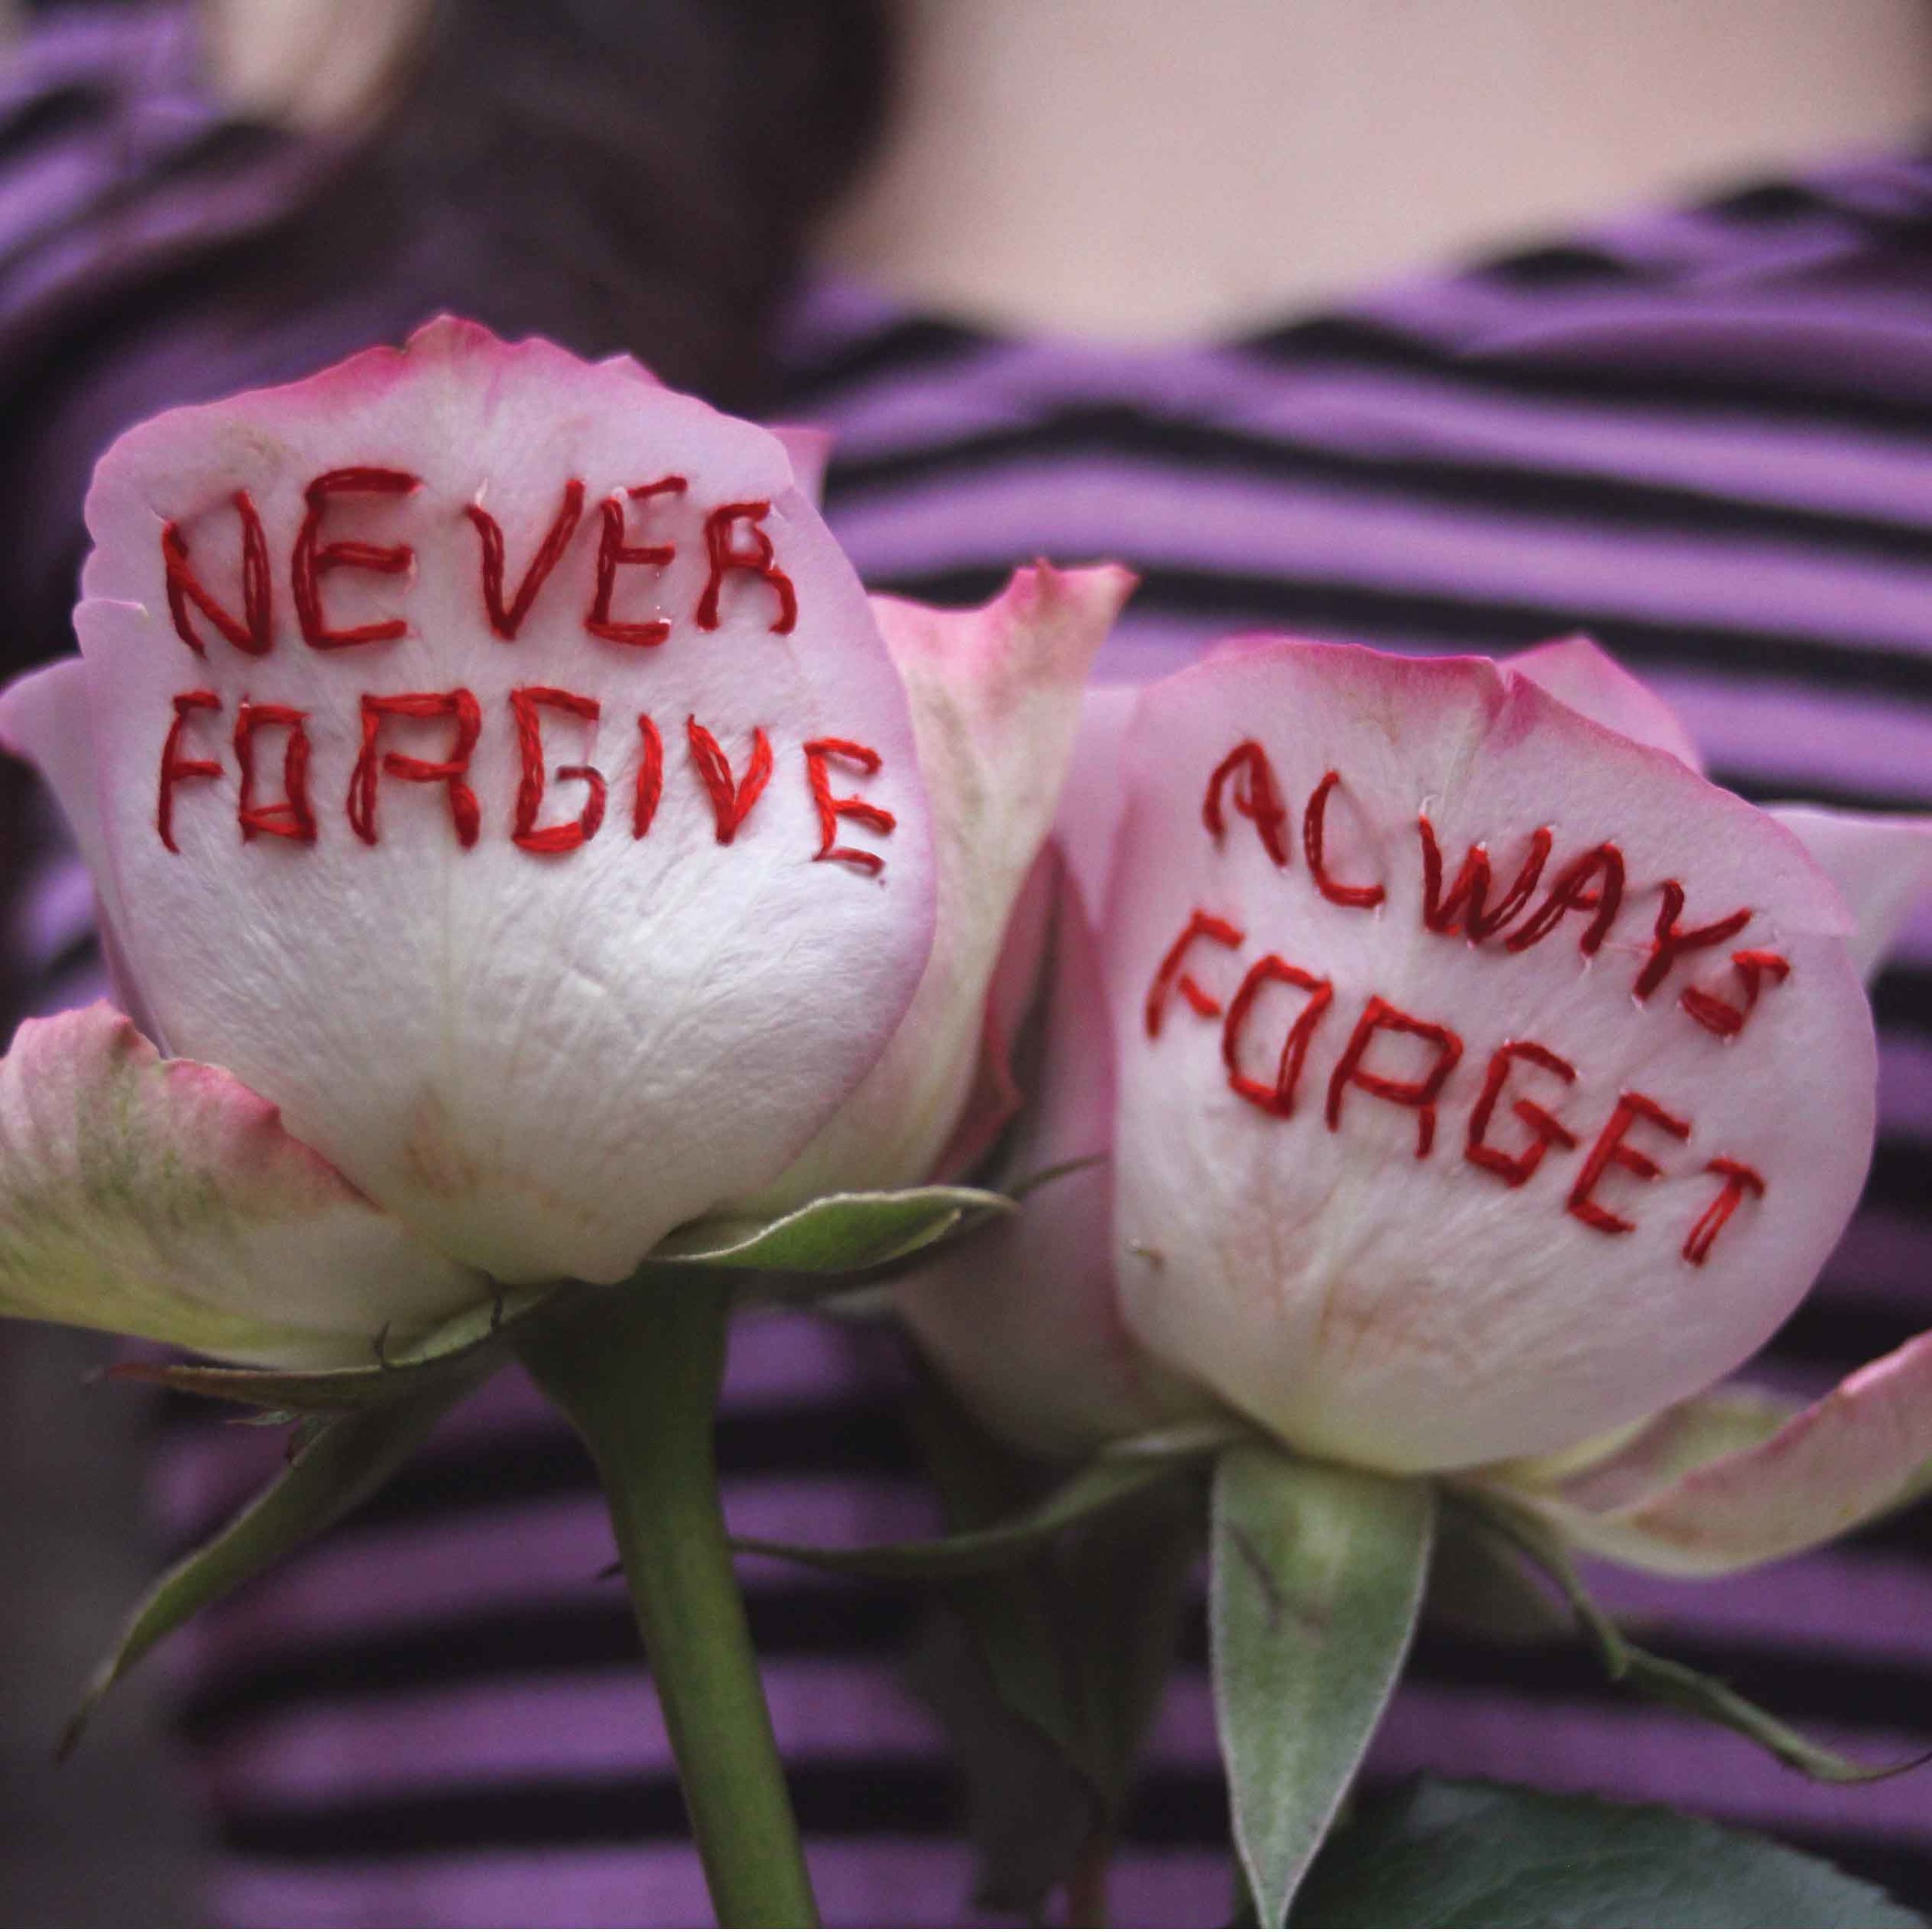 embroidered "never forgive, always forget" real roses, 2018, Sophie King